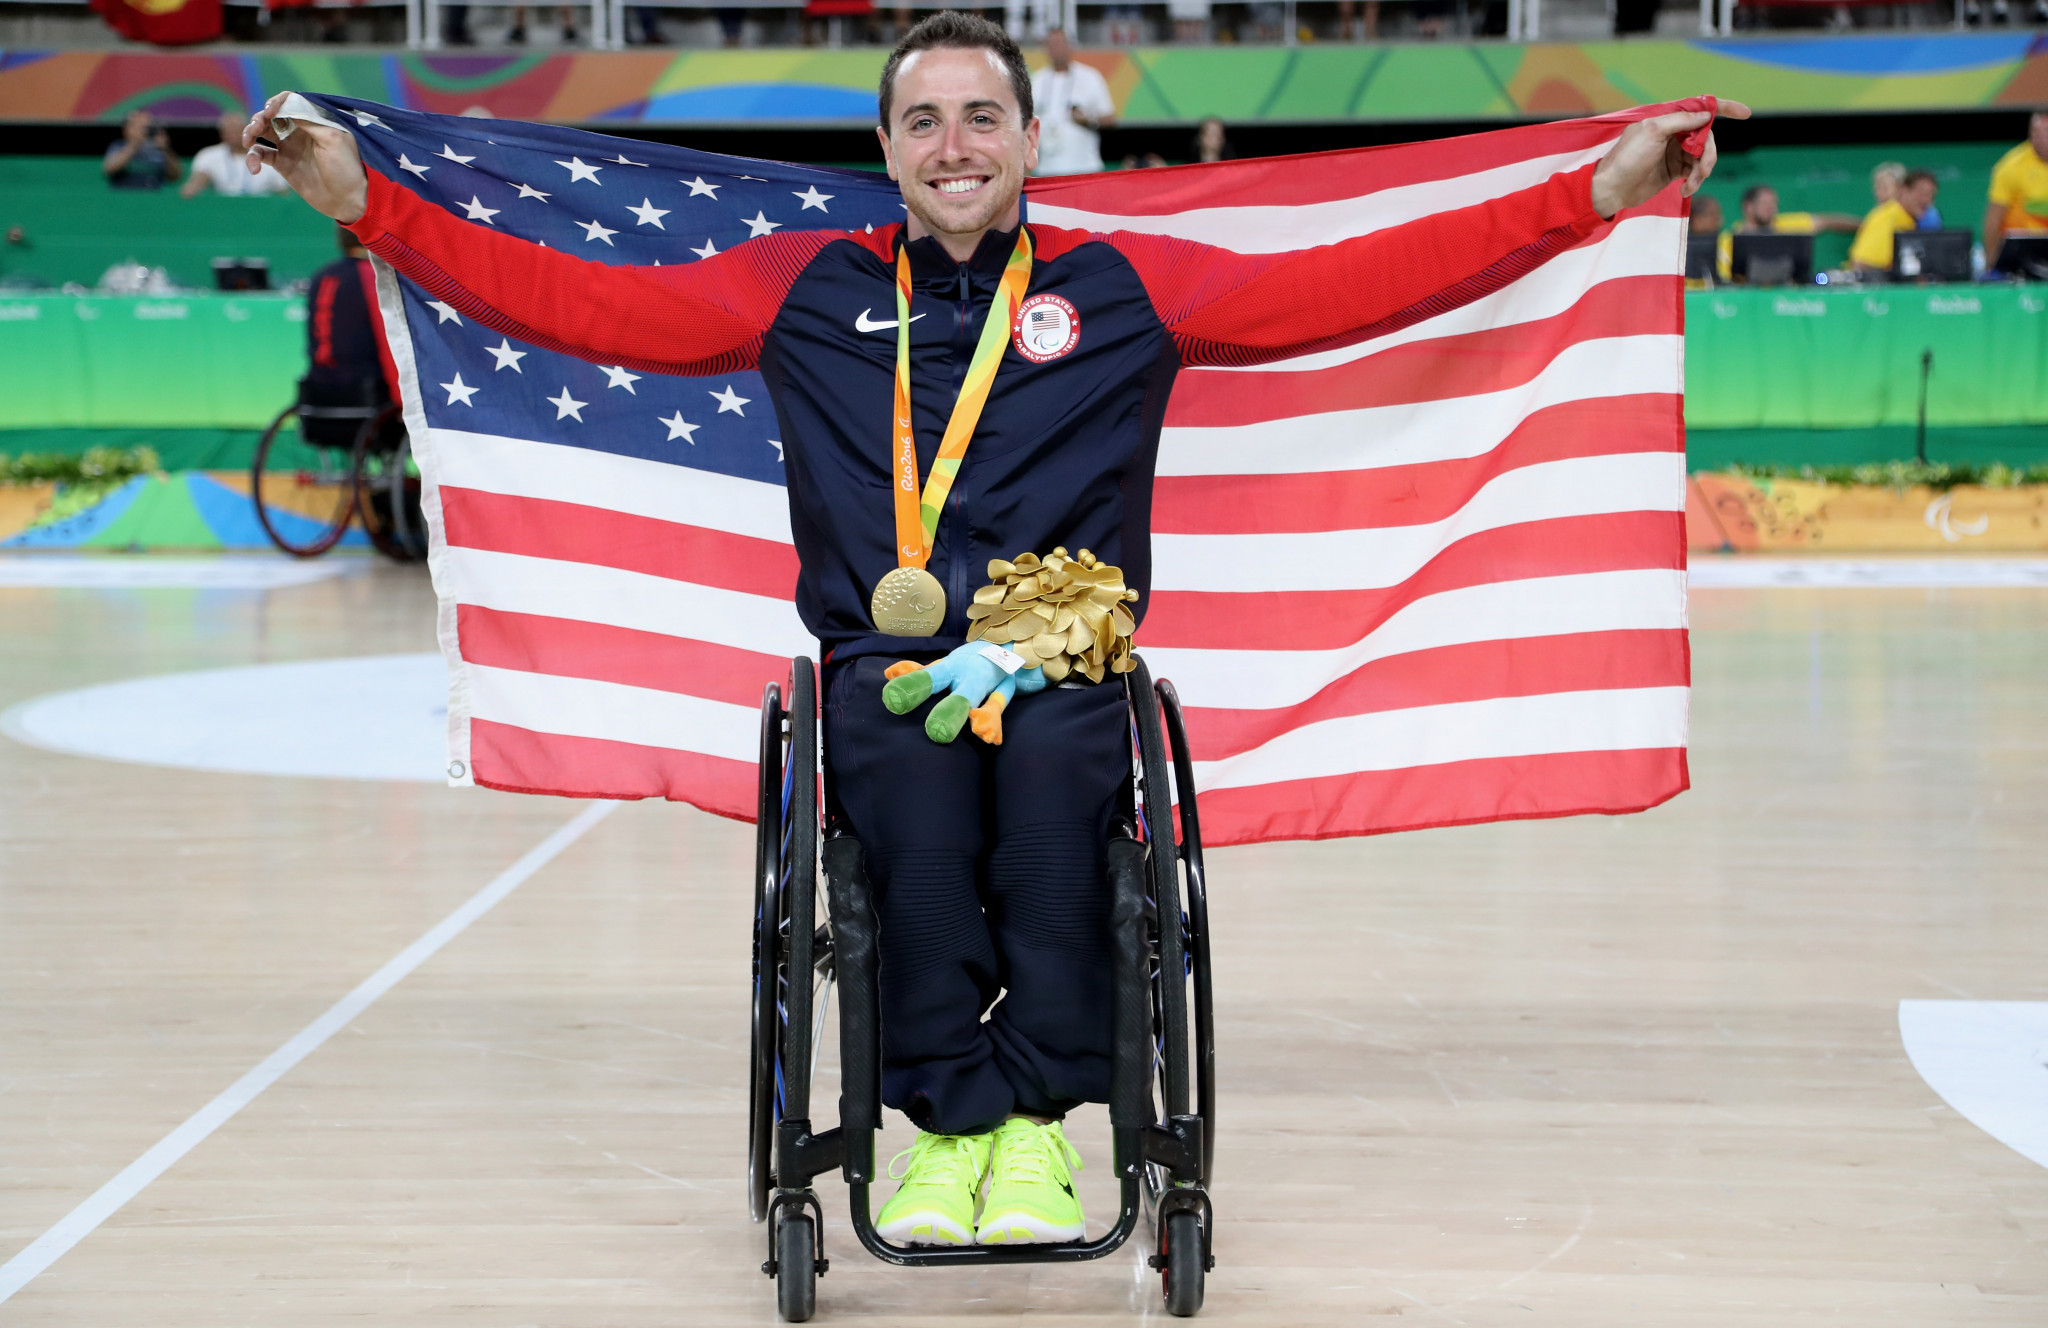 Steve Serio, who won gold with the US wheelchair basketball team at the 2015 Parapan American Games and 2016 Rio Paralympics, is in the initial selection for the 2019 team ©Getty Images